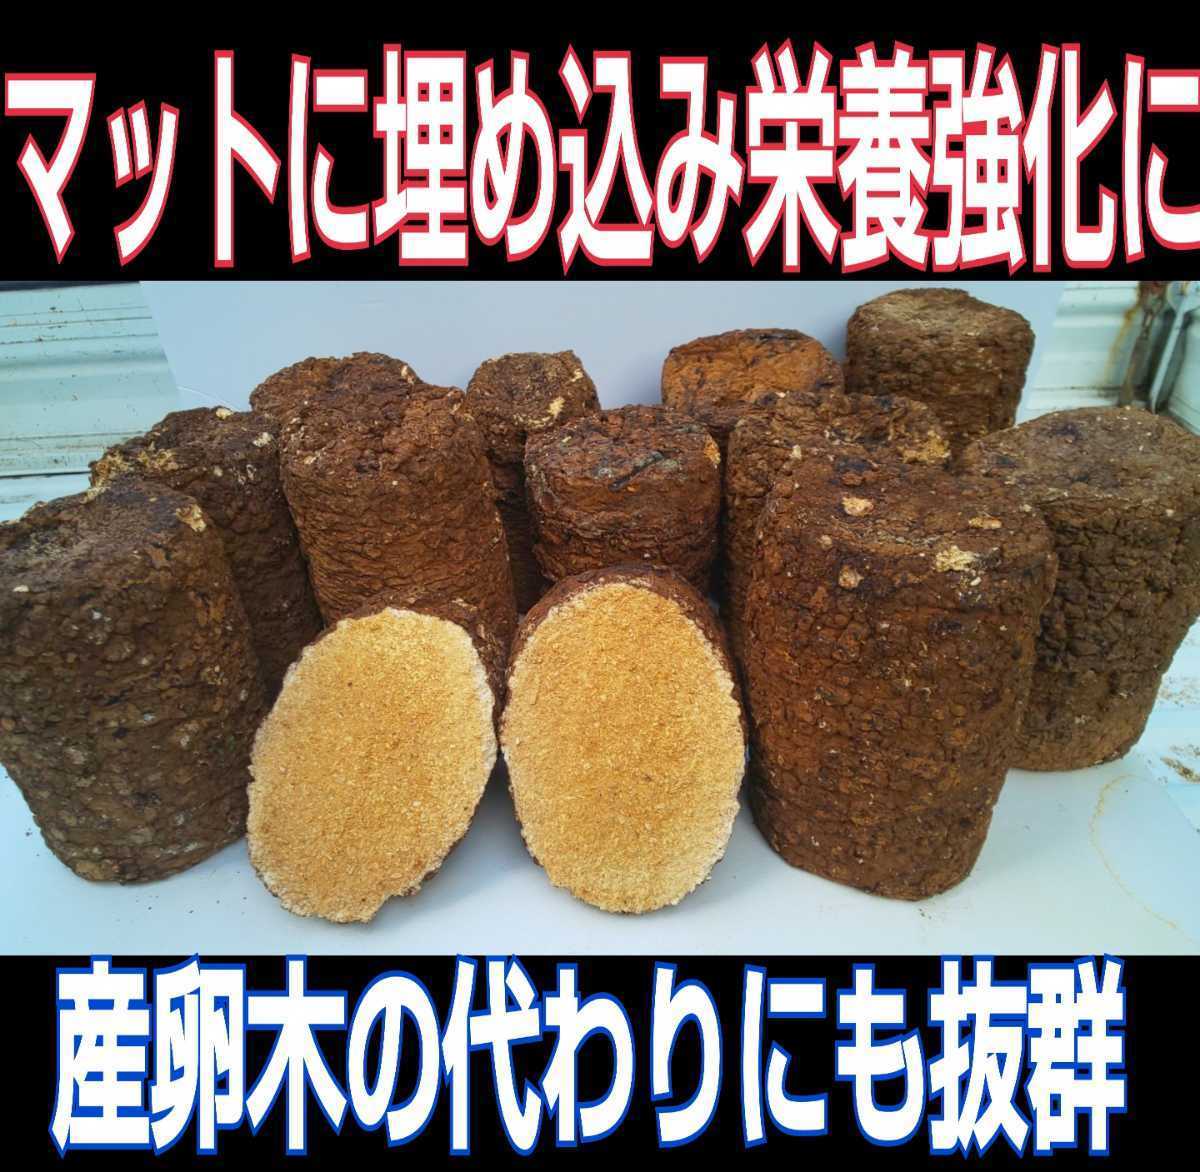 Shiitake mushroom scrapped floor block ☆ Bait of stag beetle larvae, instead of spawning trees! If you embed it in a 100 % fermentation mat, the nutrition will be enhanced and Kabuto larvae will increase the size!